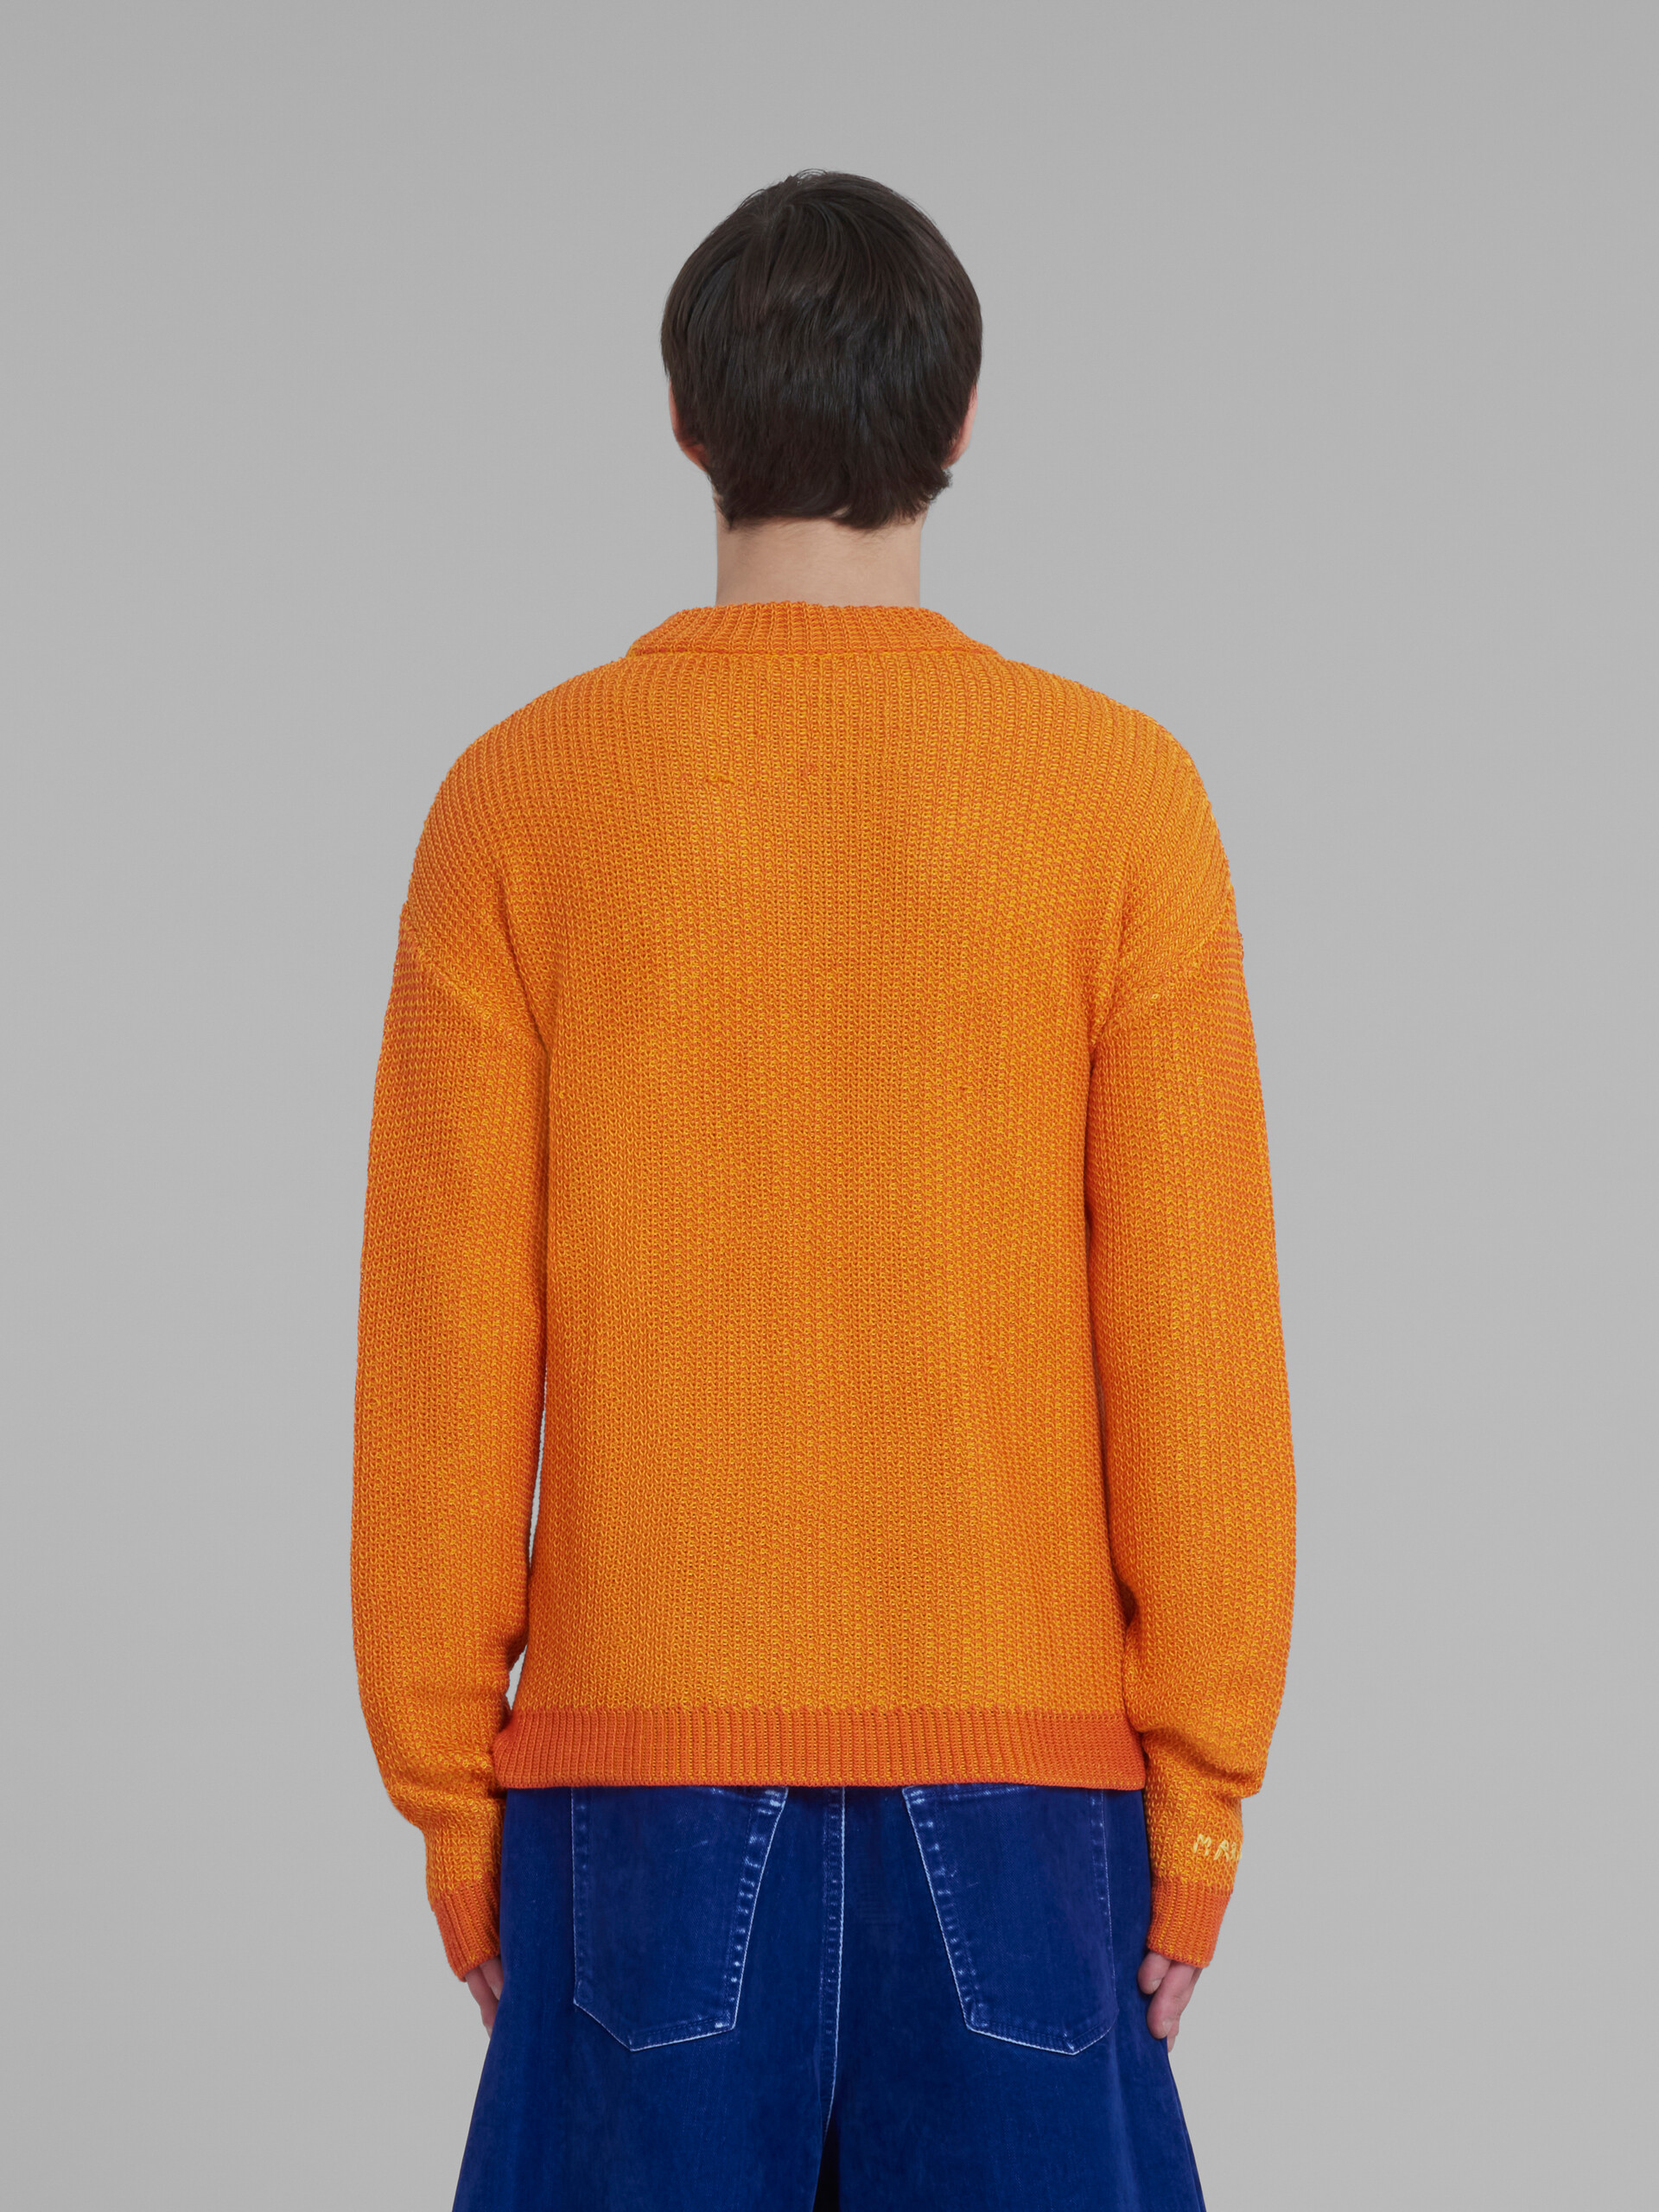 Orange jumper with circle inlay - Pullovers - Image 3